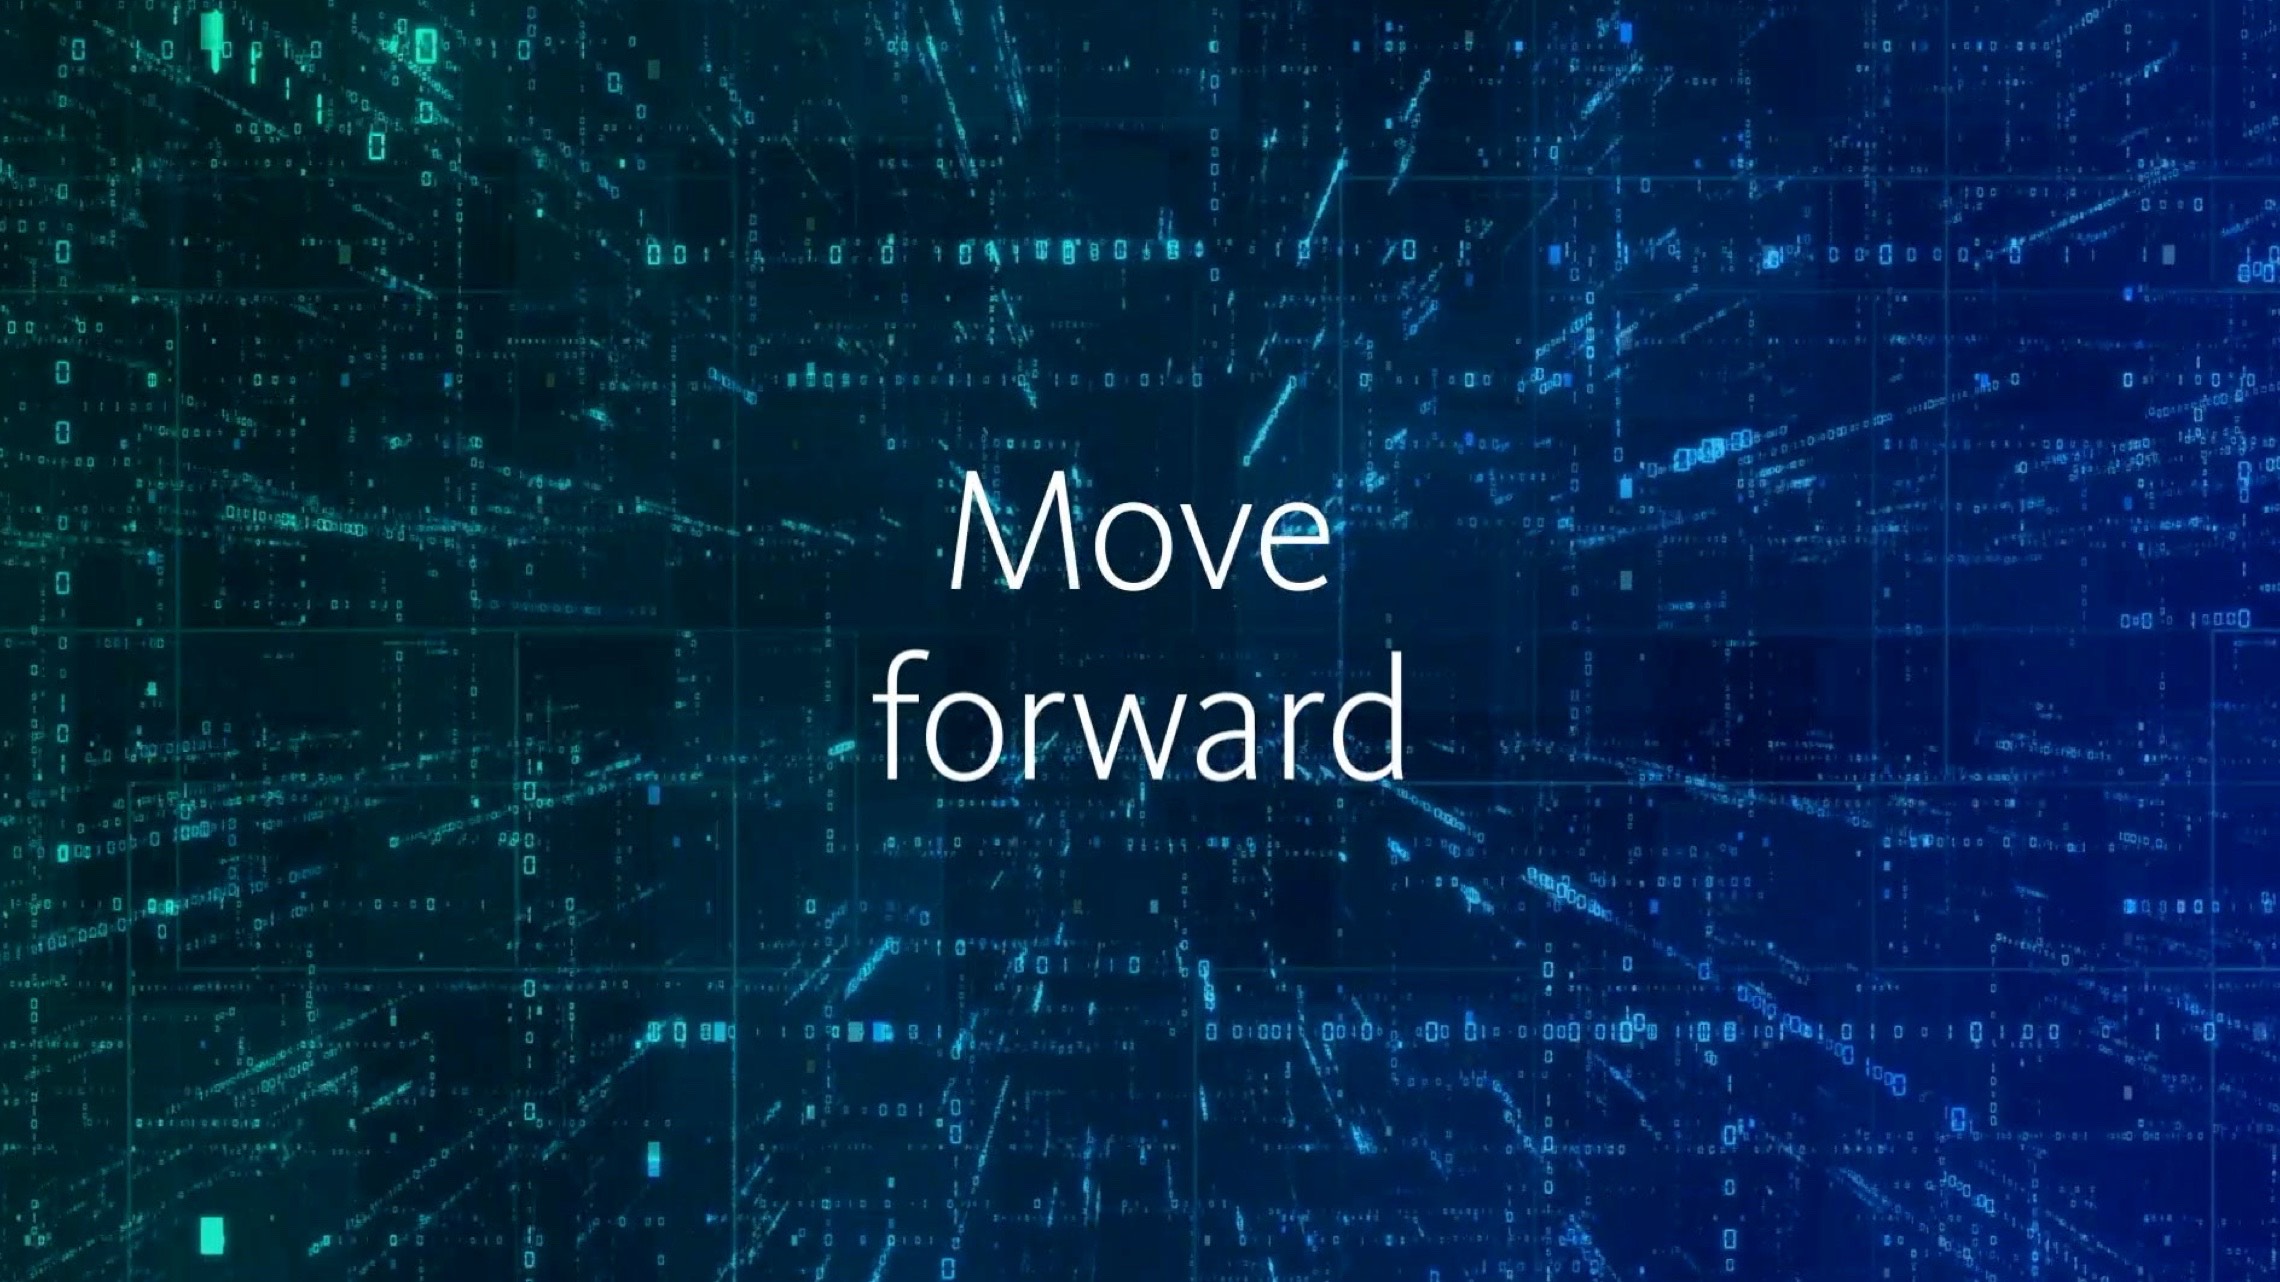 Click to play the "Conduent - Move Forward" video.